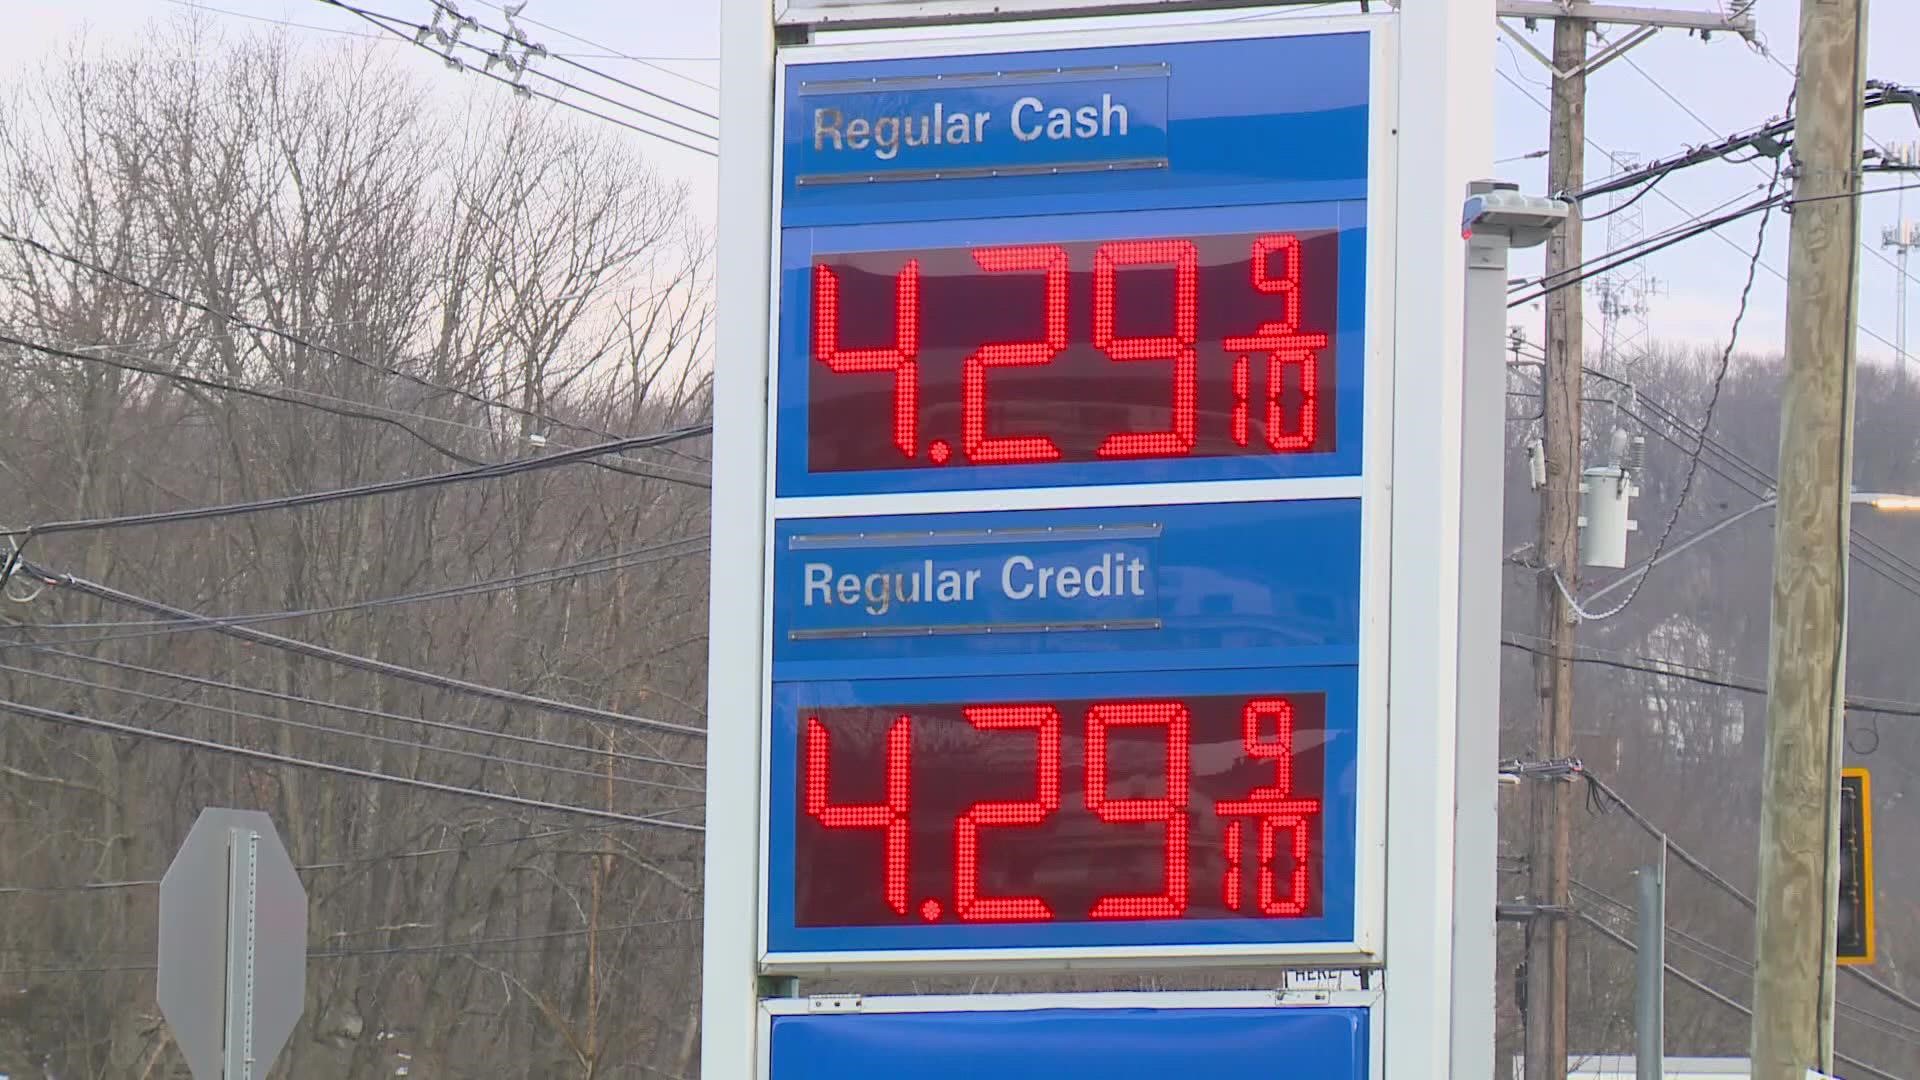 Attorney general Tong warns Connecticut residents about gas price gouging.